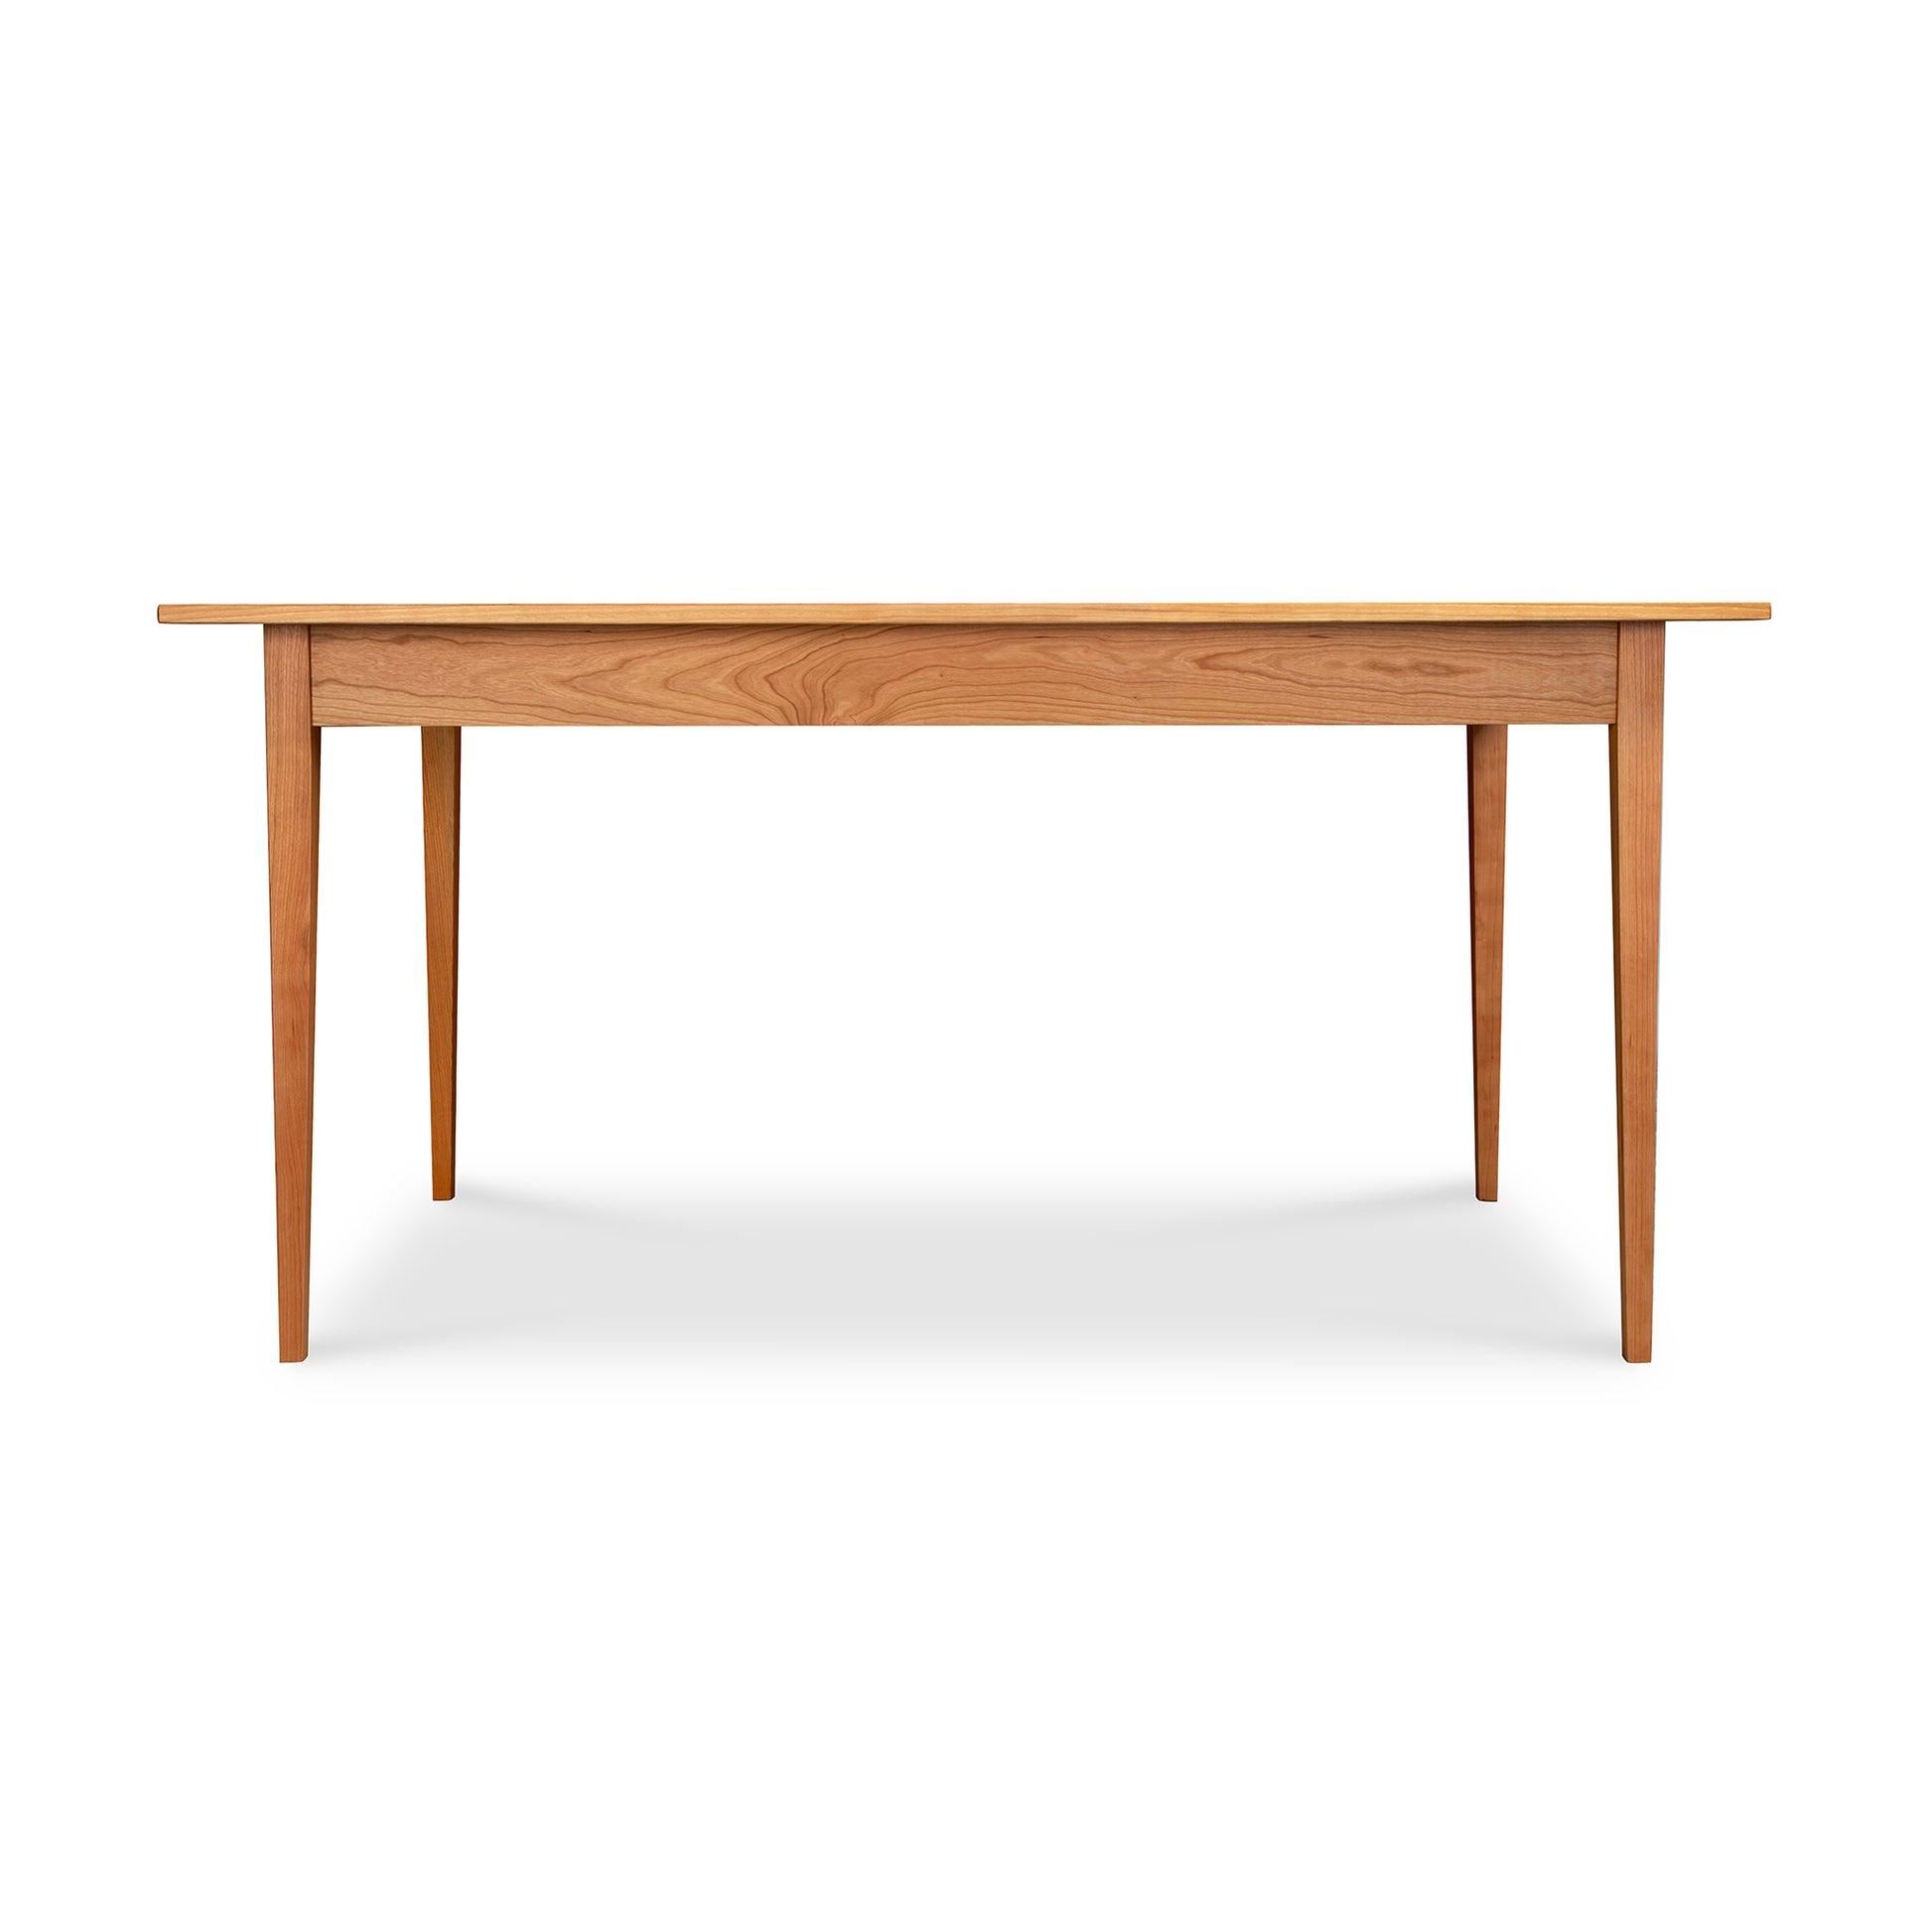 A Country Shaker Dining Table with a solid natural wood top on a white background by Vermont Woods Studios.